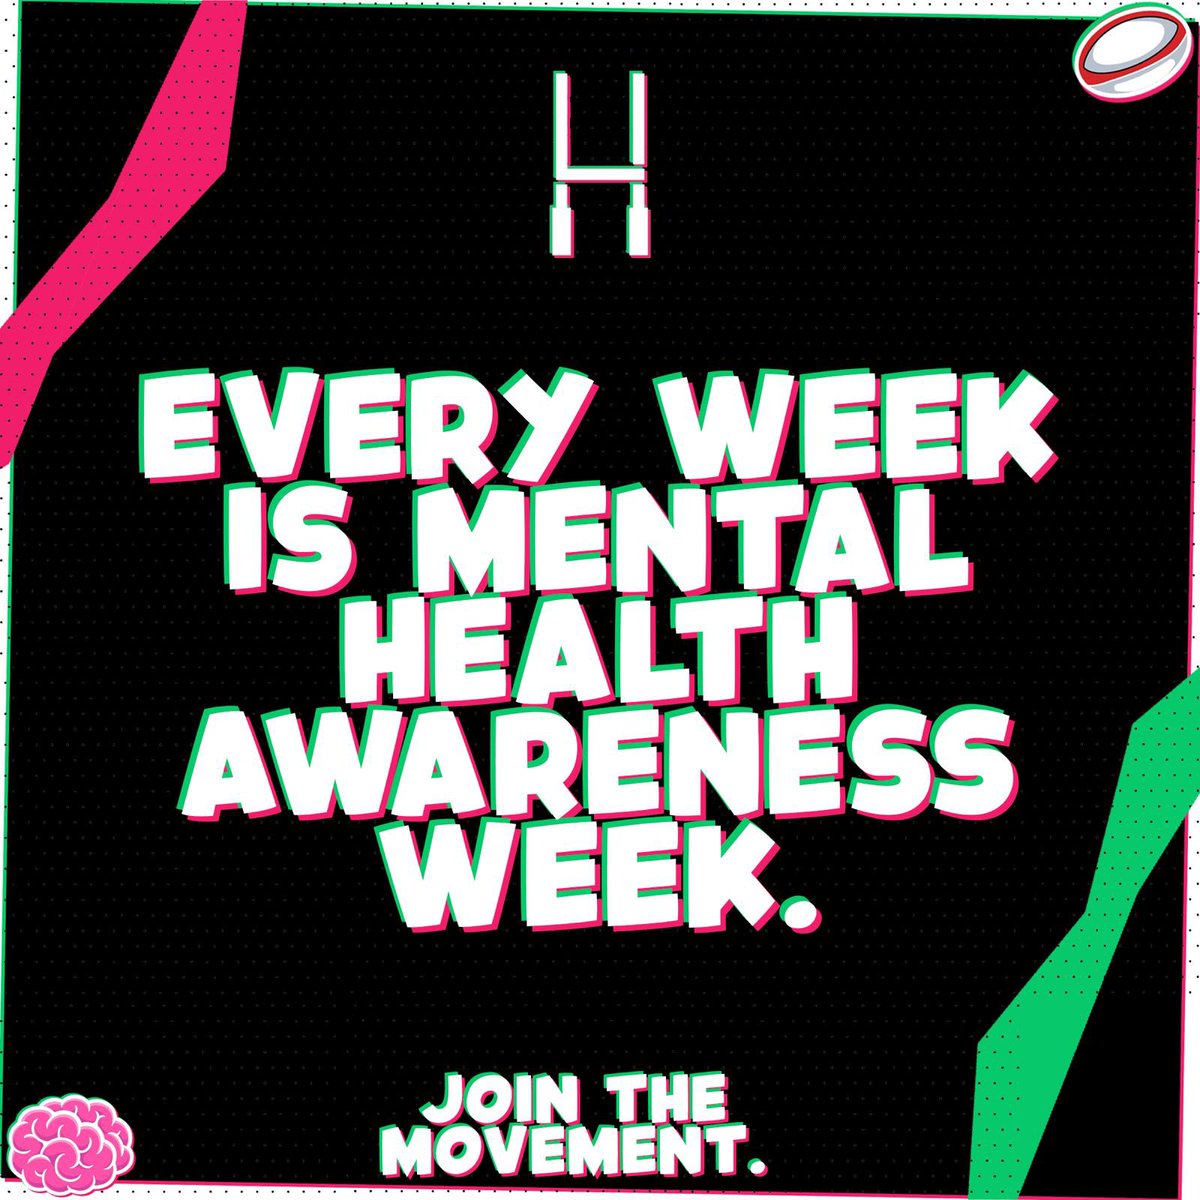 Last week was #MentalHealthAwarenessWeek, but it’s important we talk and check-in EVERY week 🖤🤍 #TackleTheStigma 🗣️